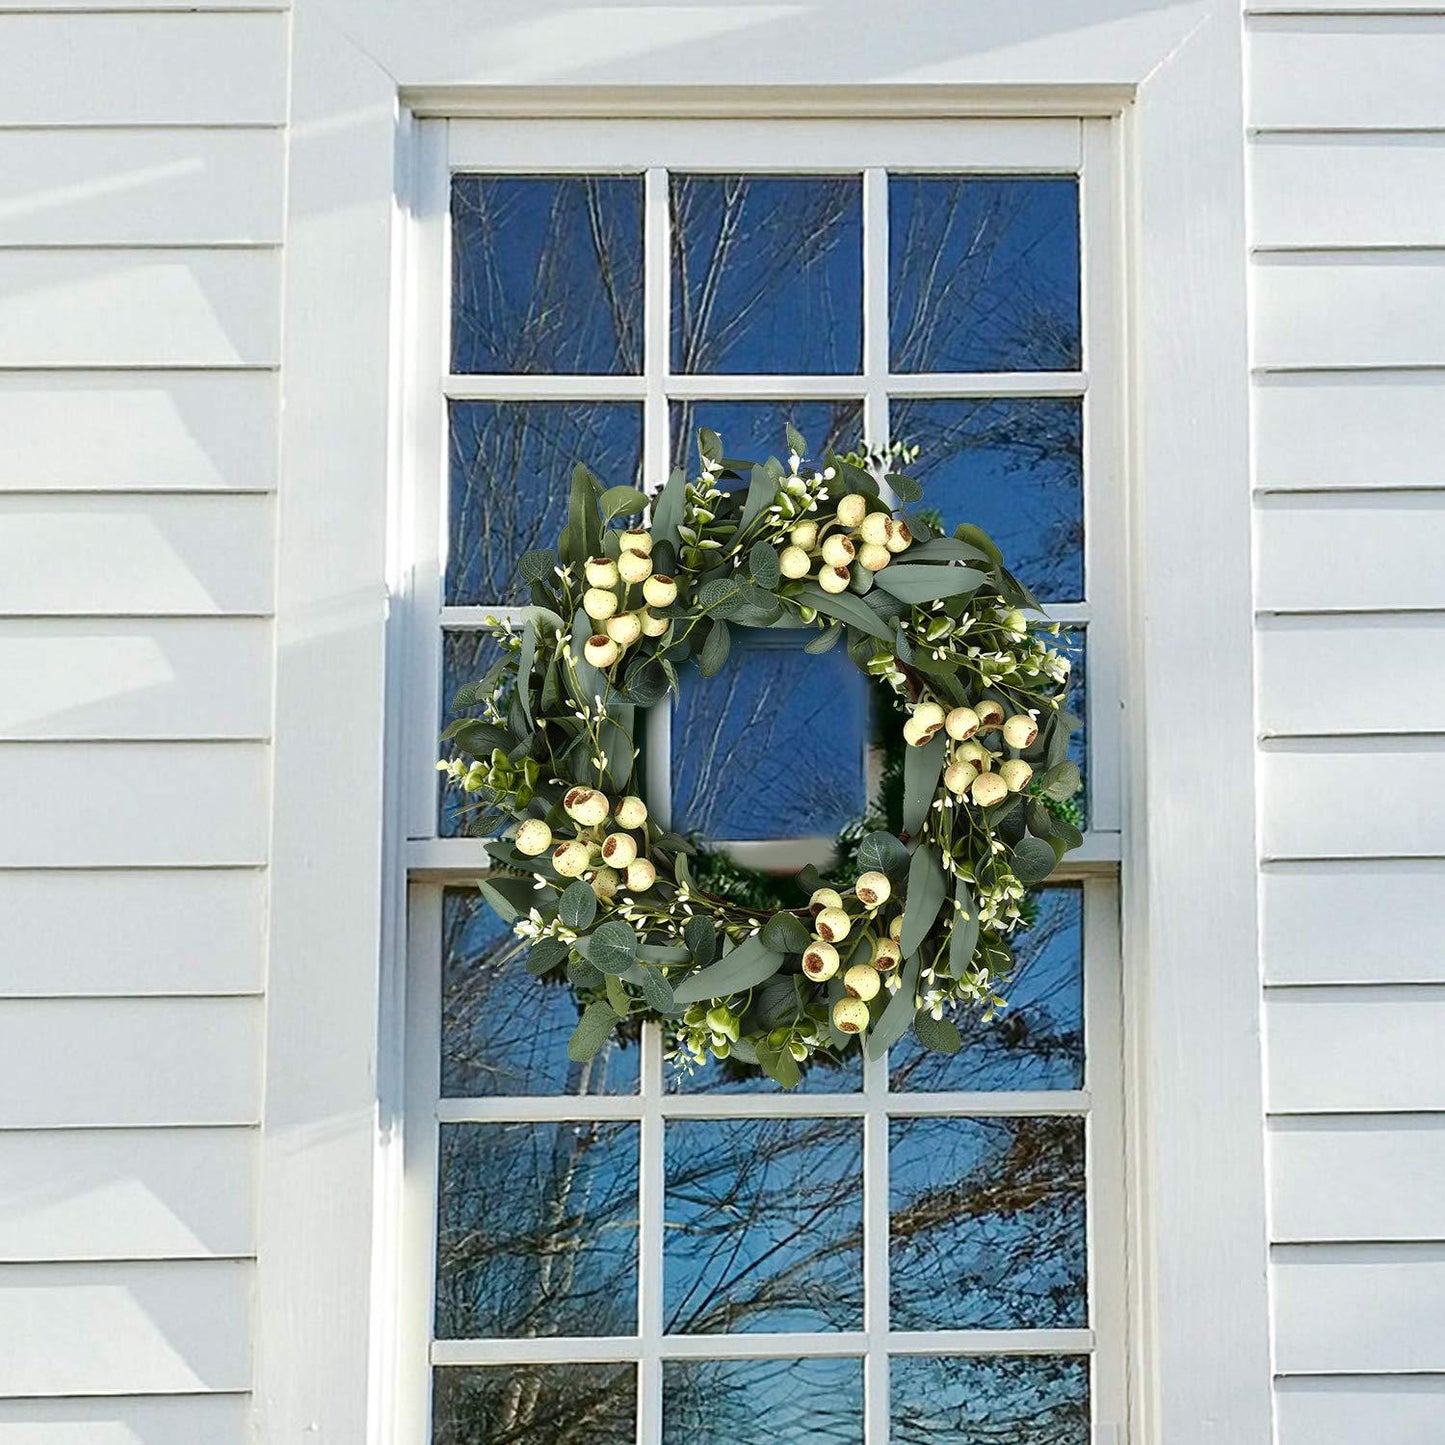 Rustic Vine Wreaths 9.84"- Charming and Versatile Accents for Outdoor Spaces,Green Decor for Home, Farmhouse